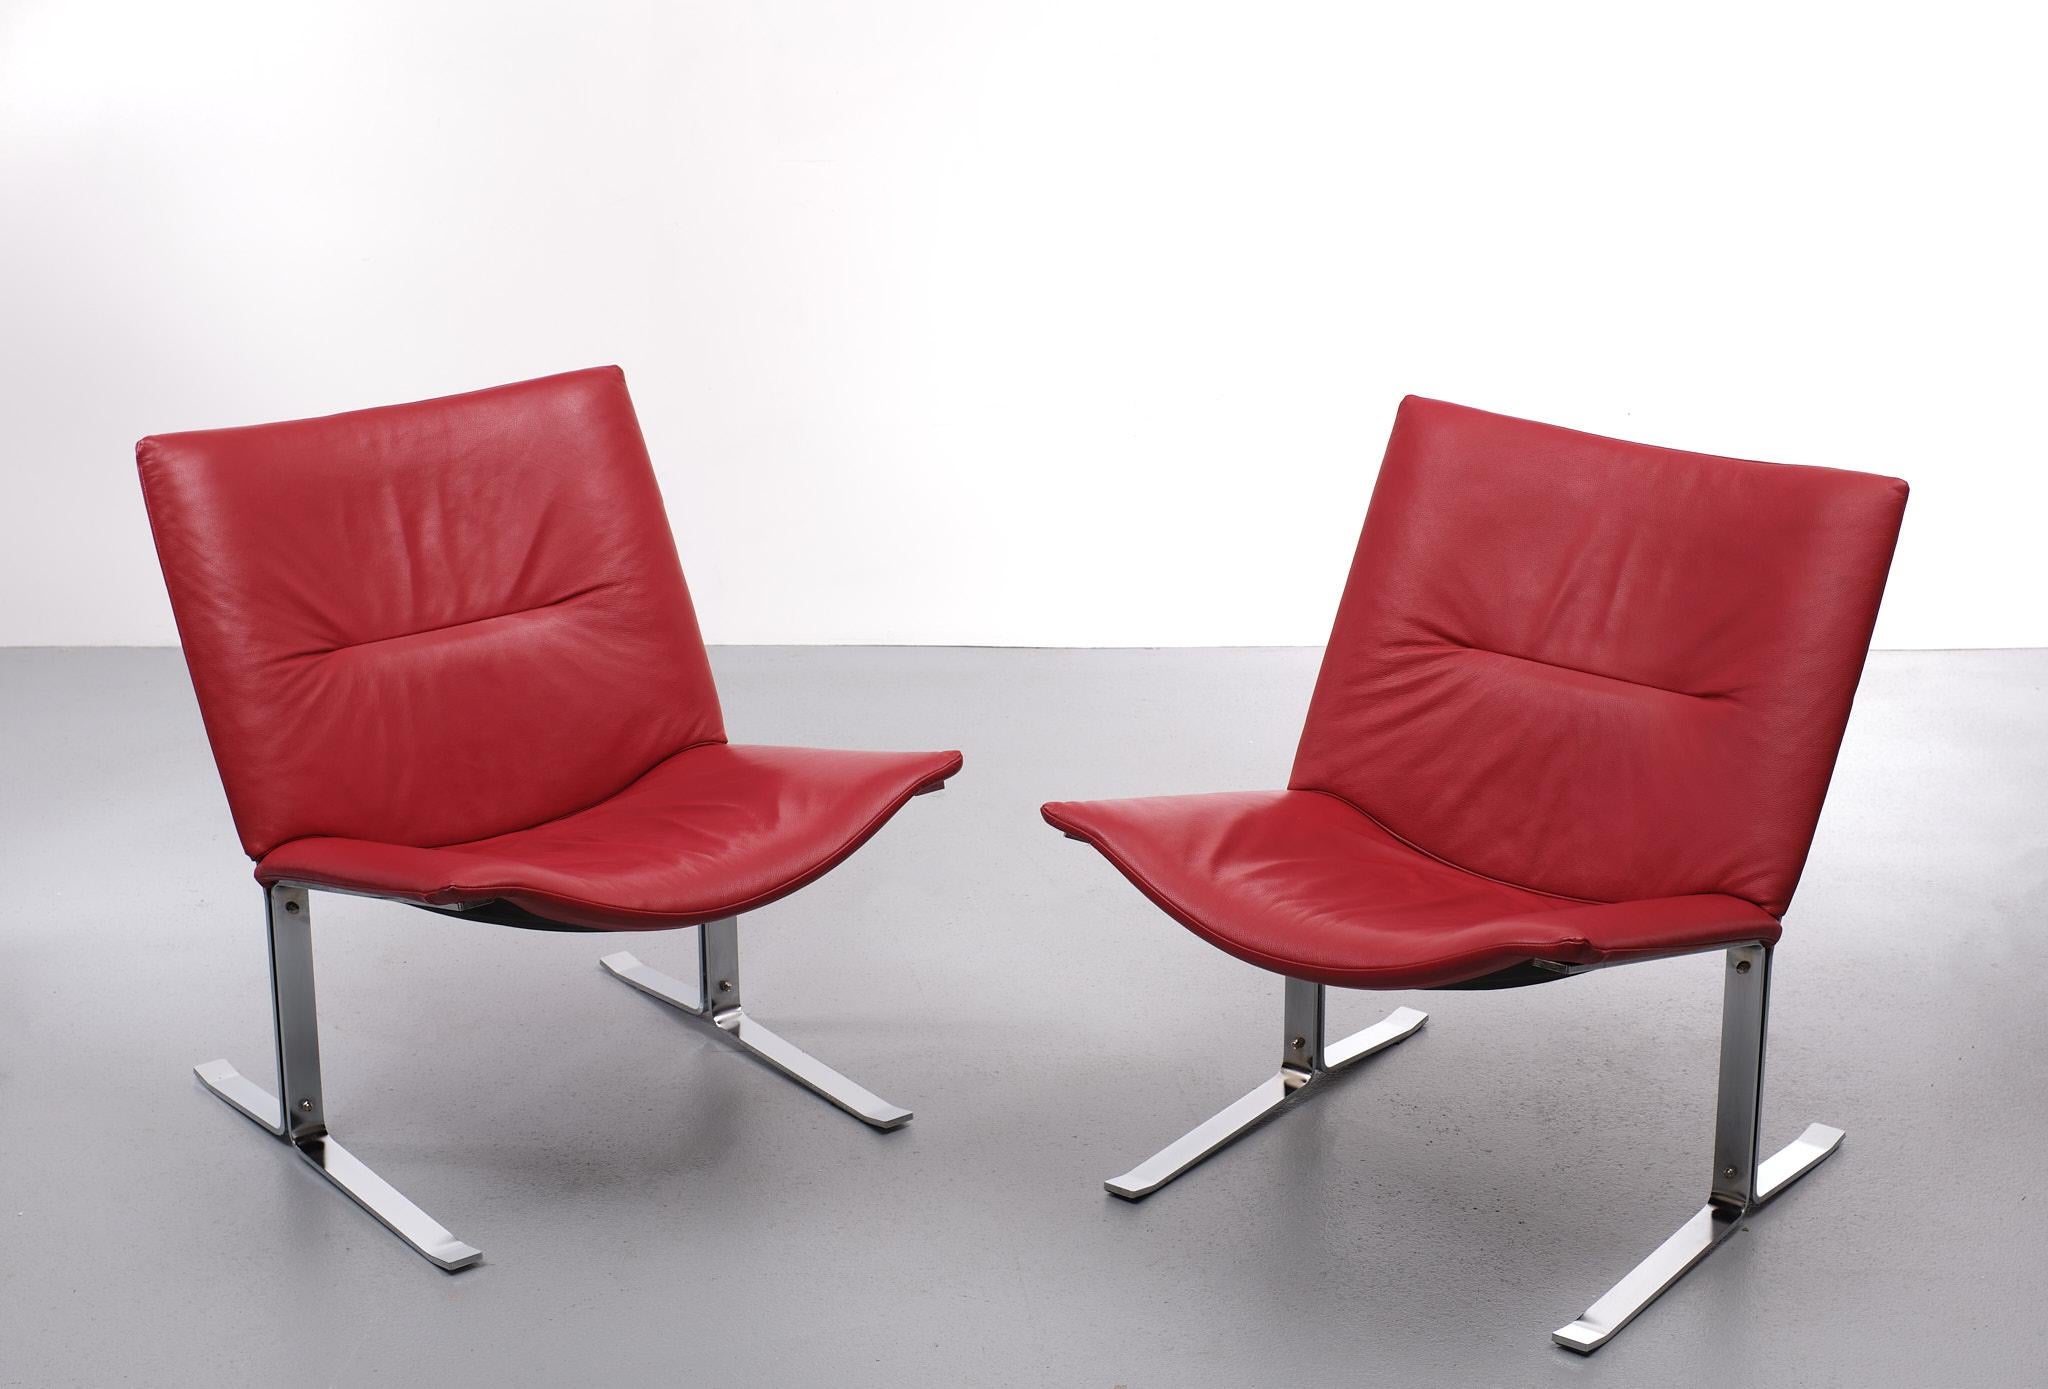 Late 20th Century Kebe Mobelfabrik Red Leather Lounge Chairs 1980s Denmark